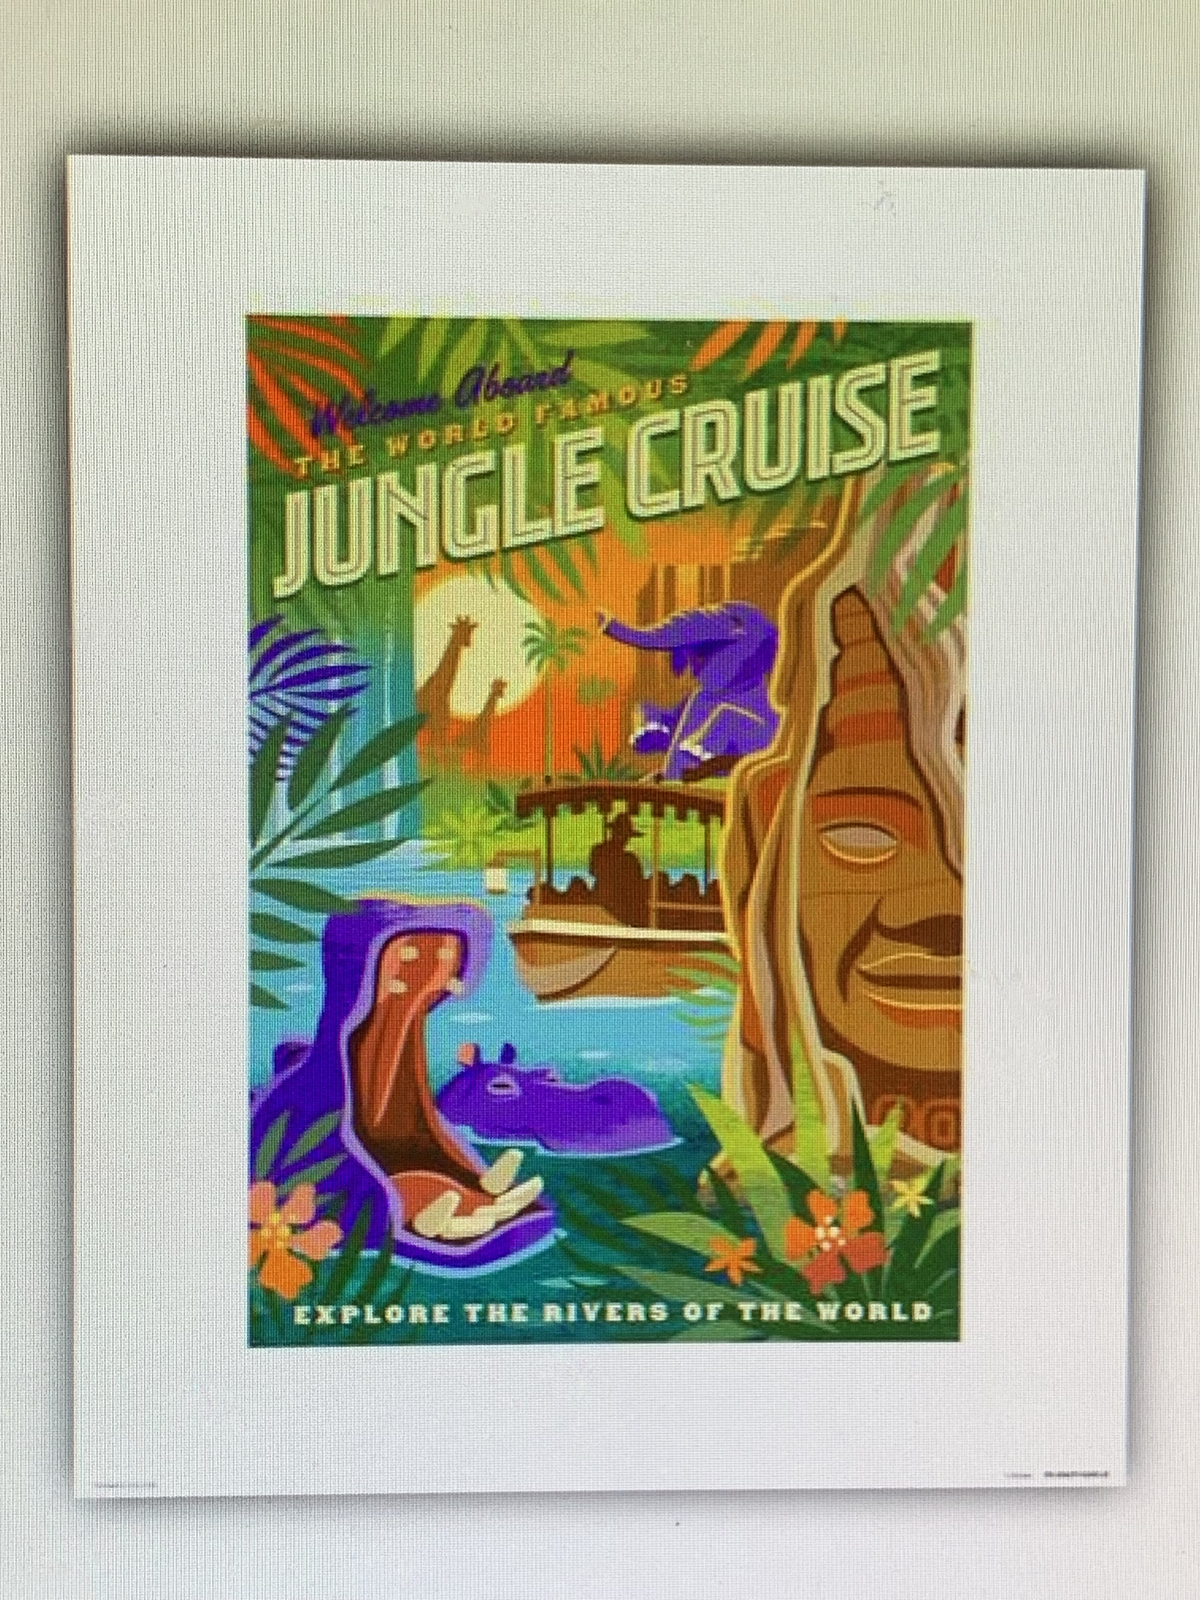 Disney Parks Jungle Cruise Attraction Poster Art Print 16 x 20 More Sizes - $47.90